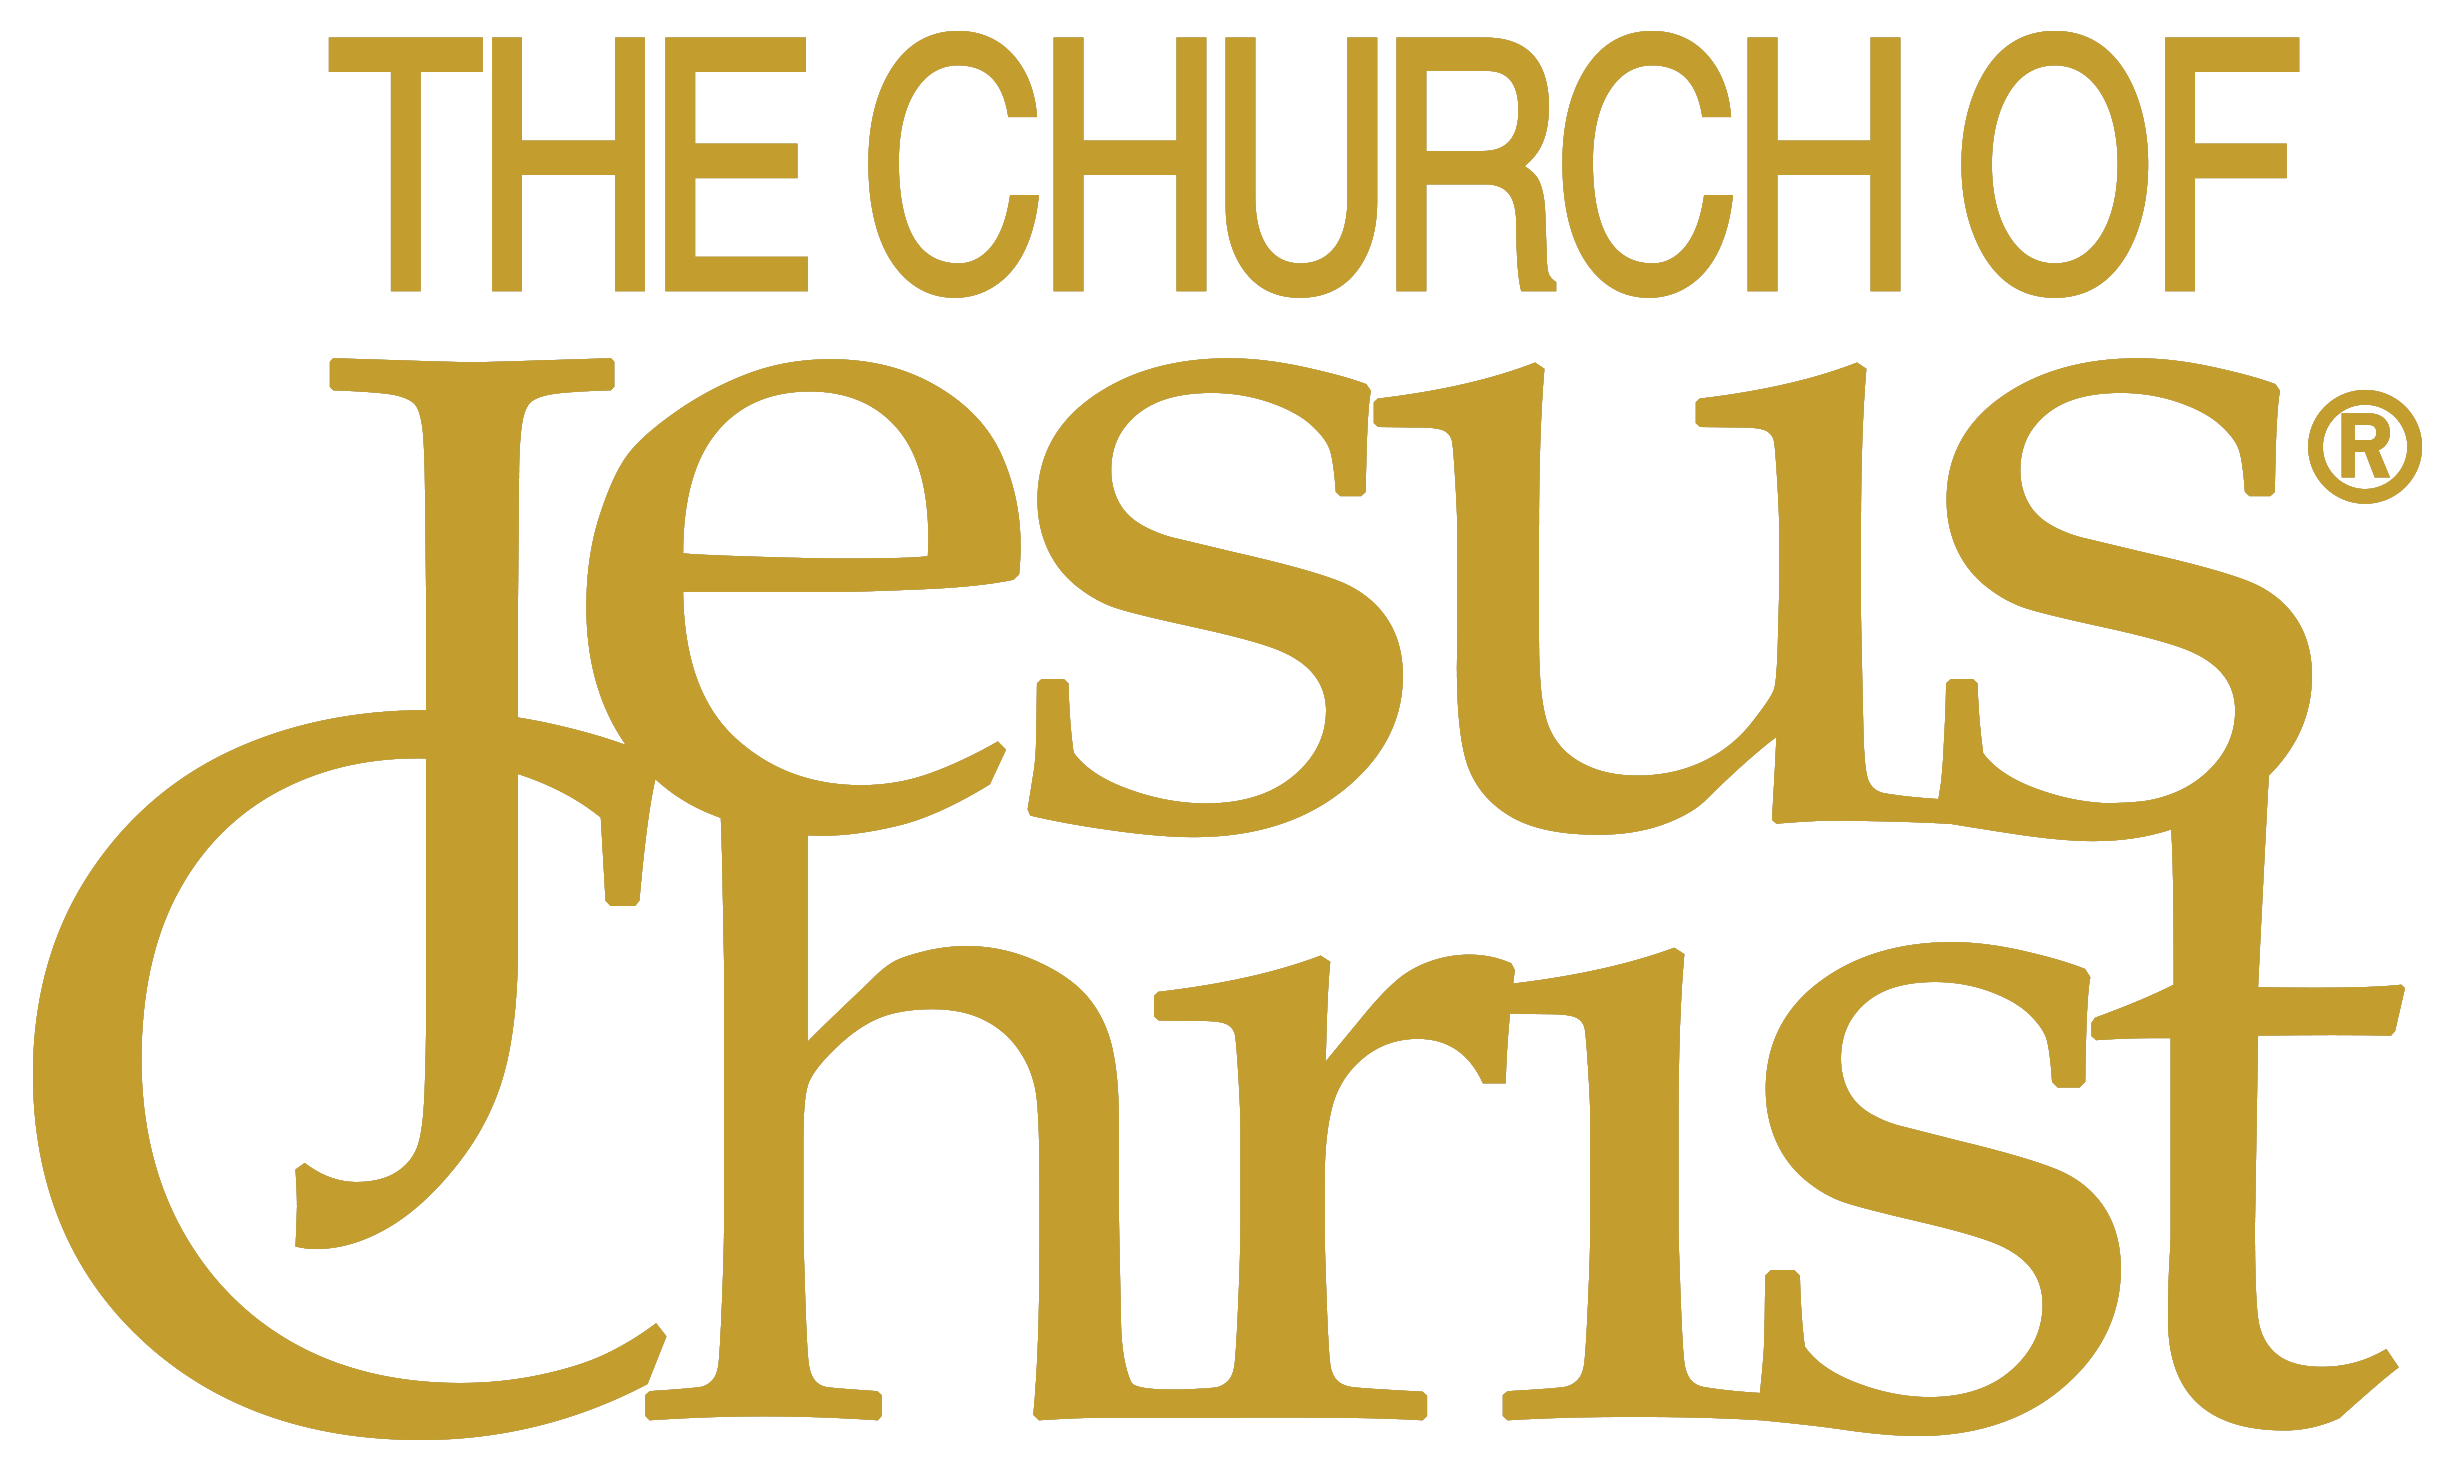 The_Church_of_Jesus_Christ_trademarked_logo.png